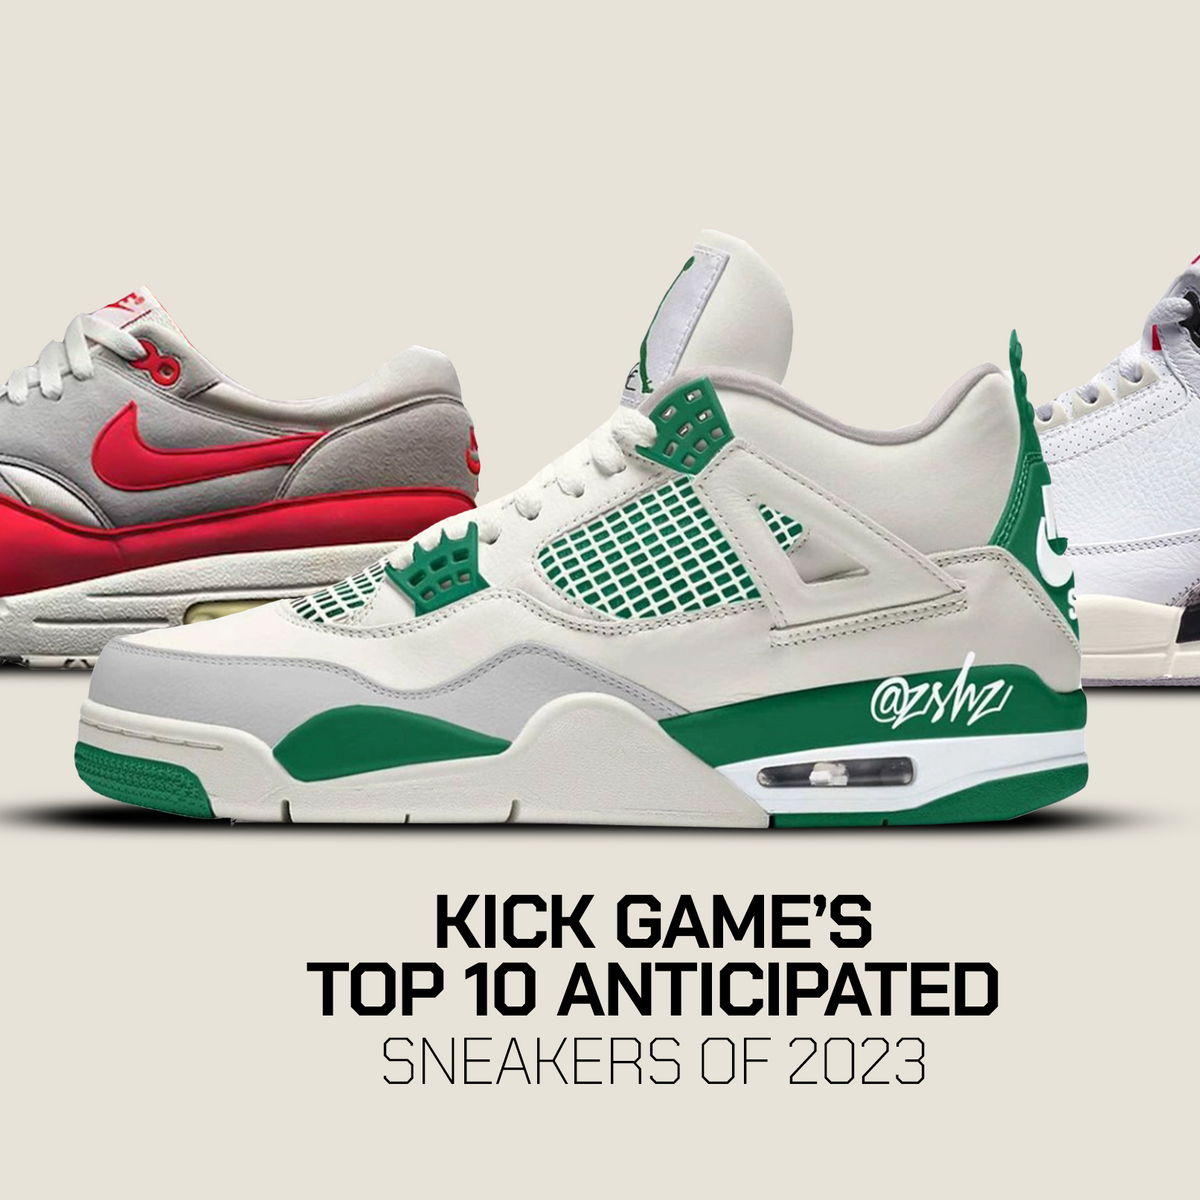 UrlfreezeShops’s Most Anticipated Sneakers of 2023